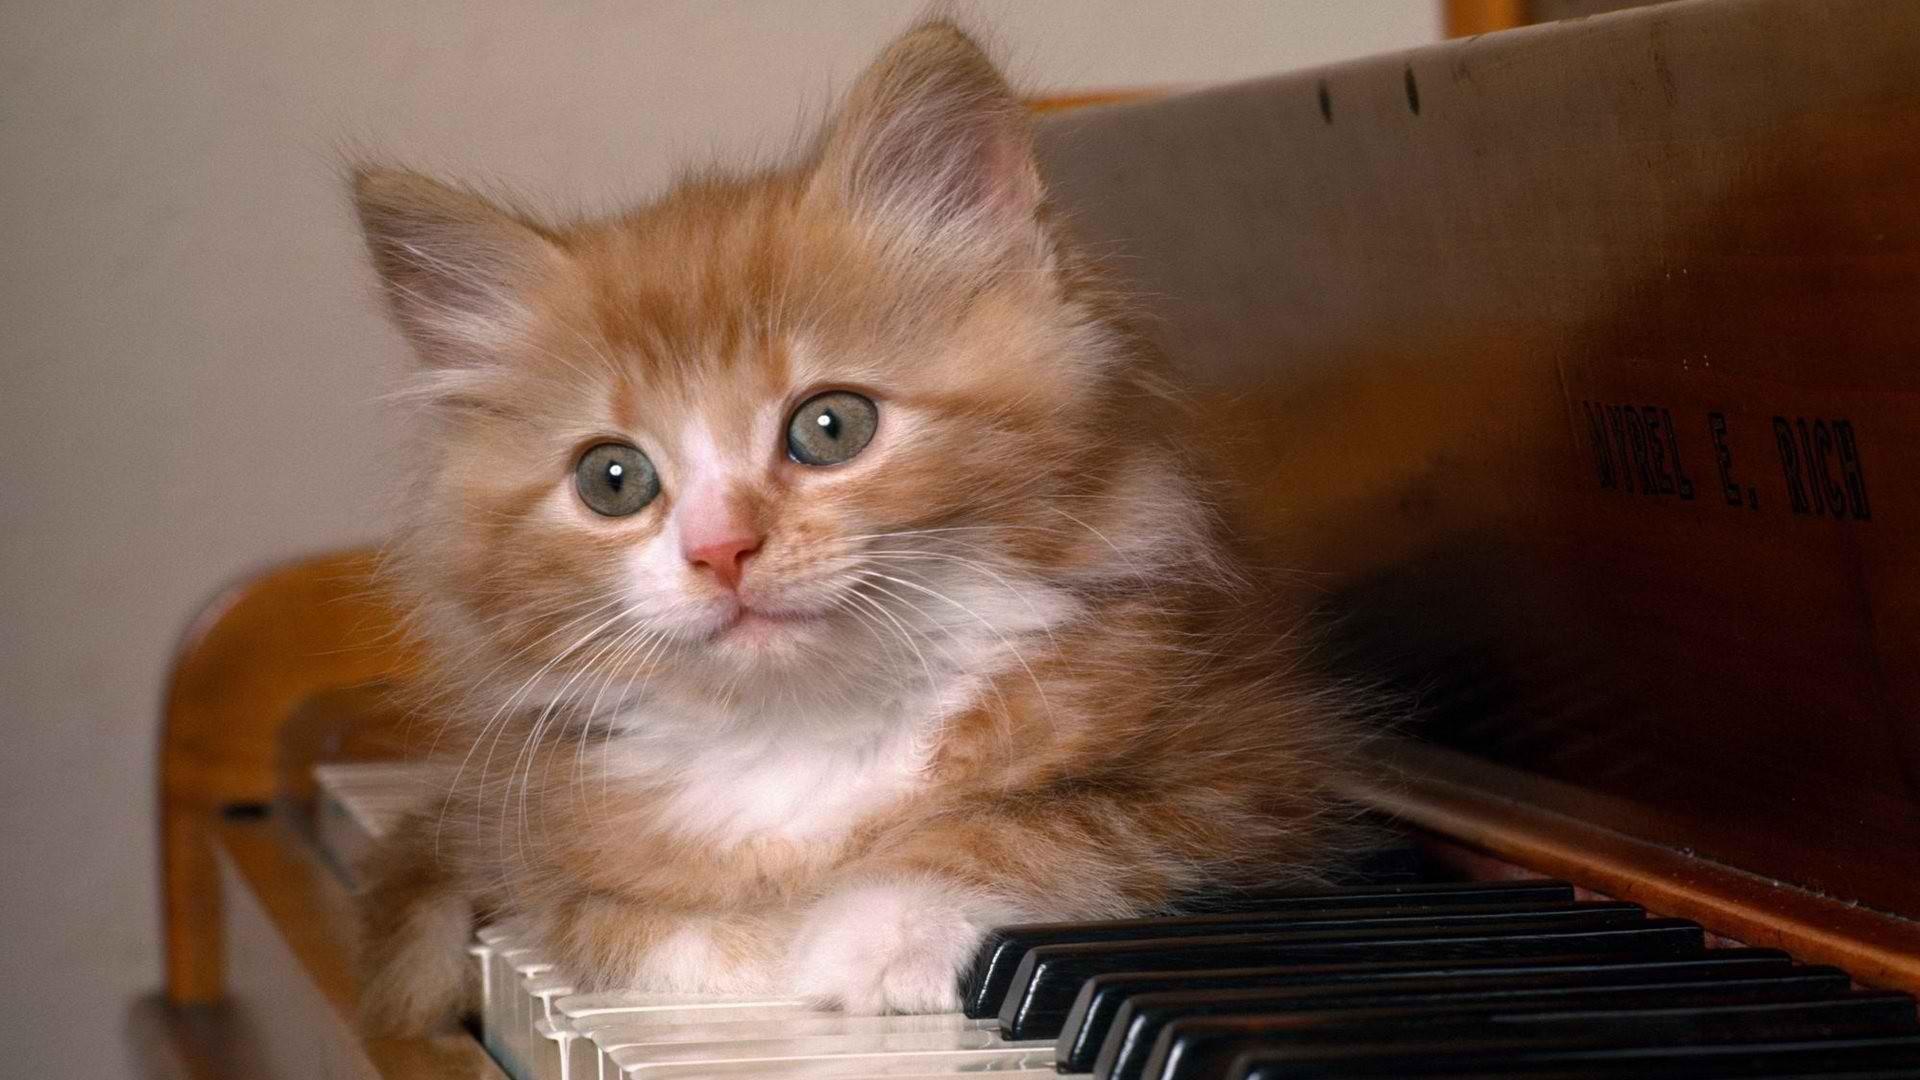 Cat on the keys of the piano wallpaper and image